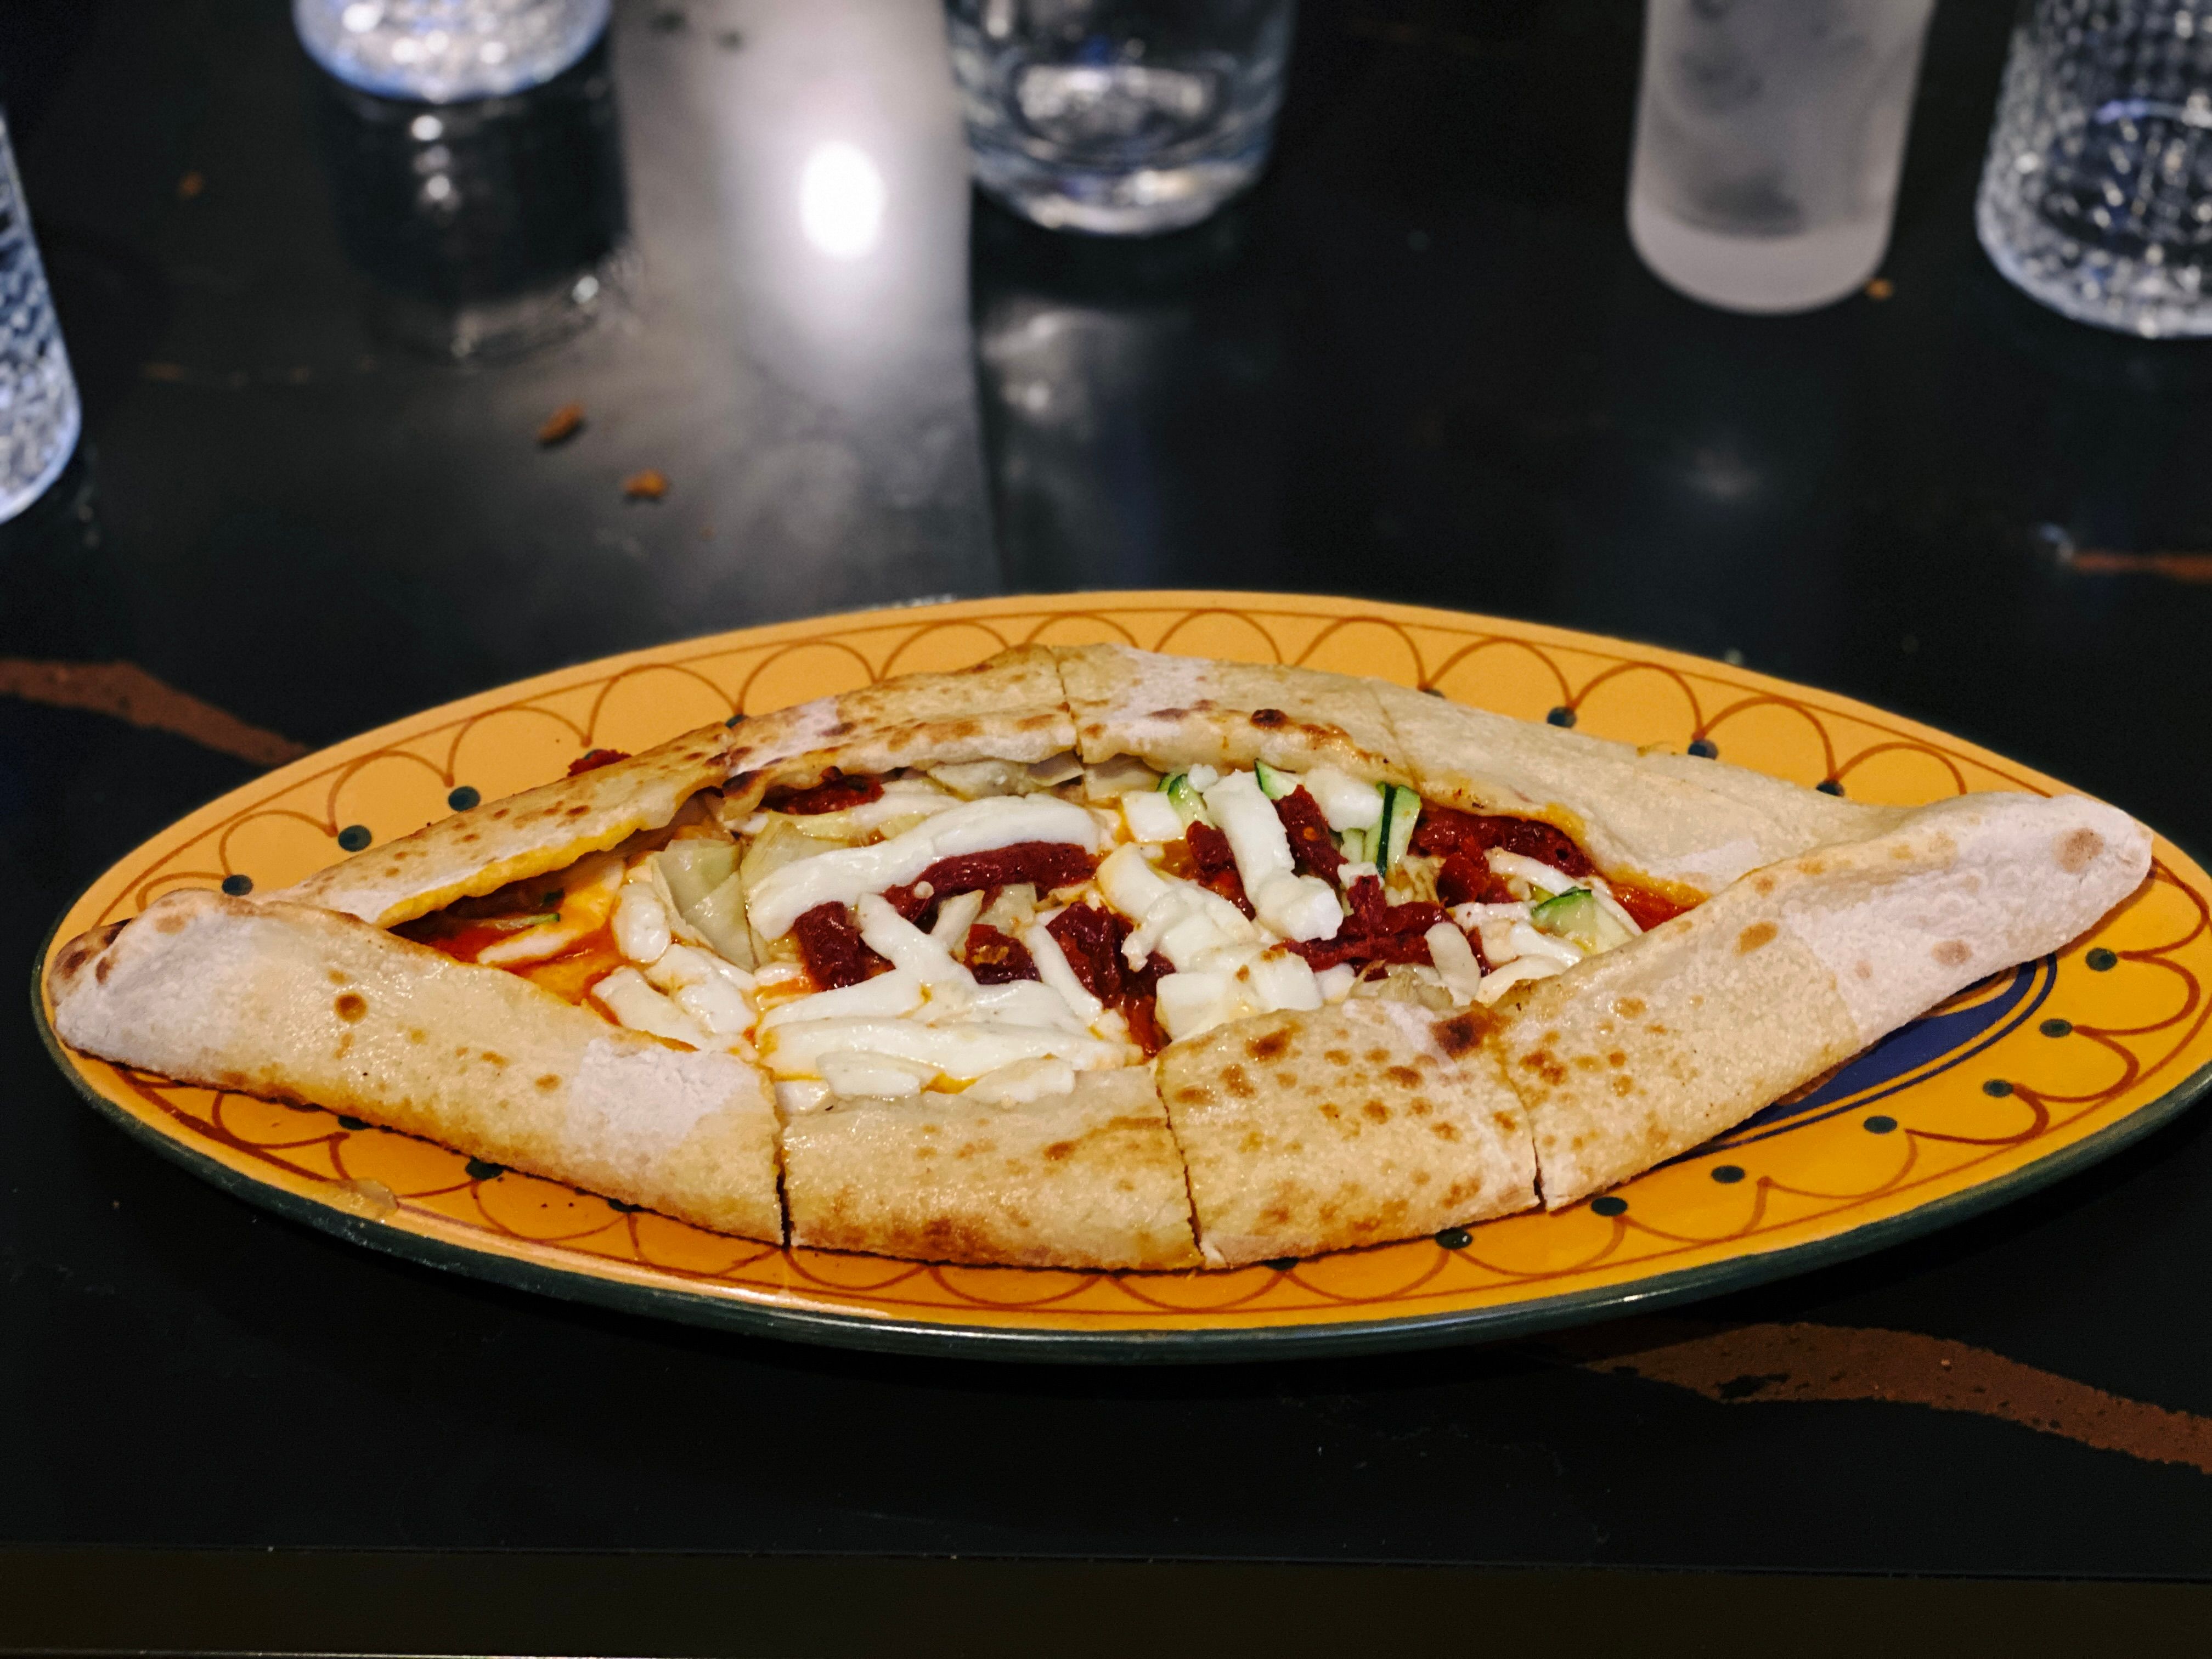 A photo of the spiced halloumi pizza, which is actually Turkish pide with a tomato sauce inside it and strips of halloumi and what I think was sun-dried tomato.